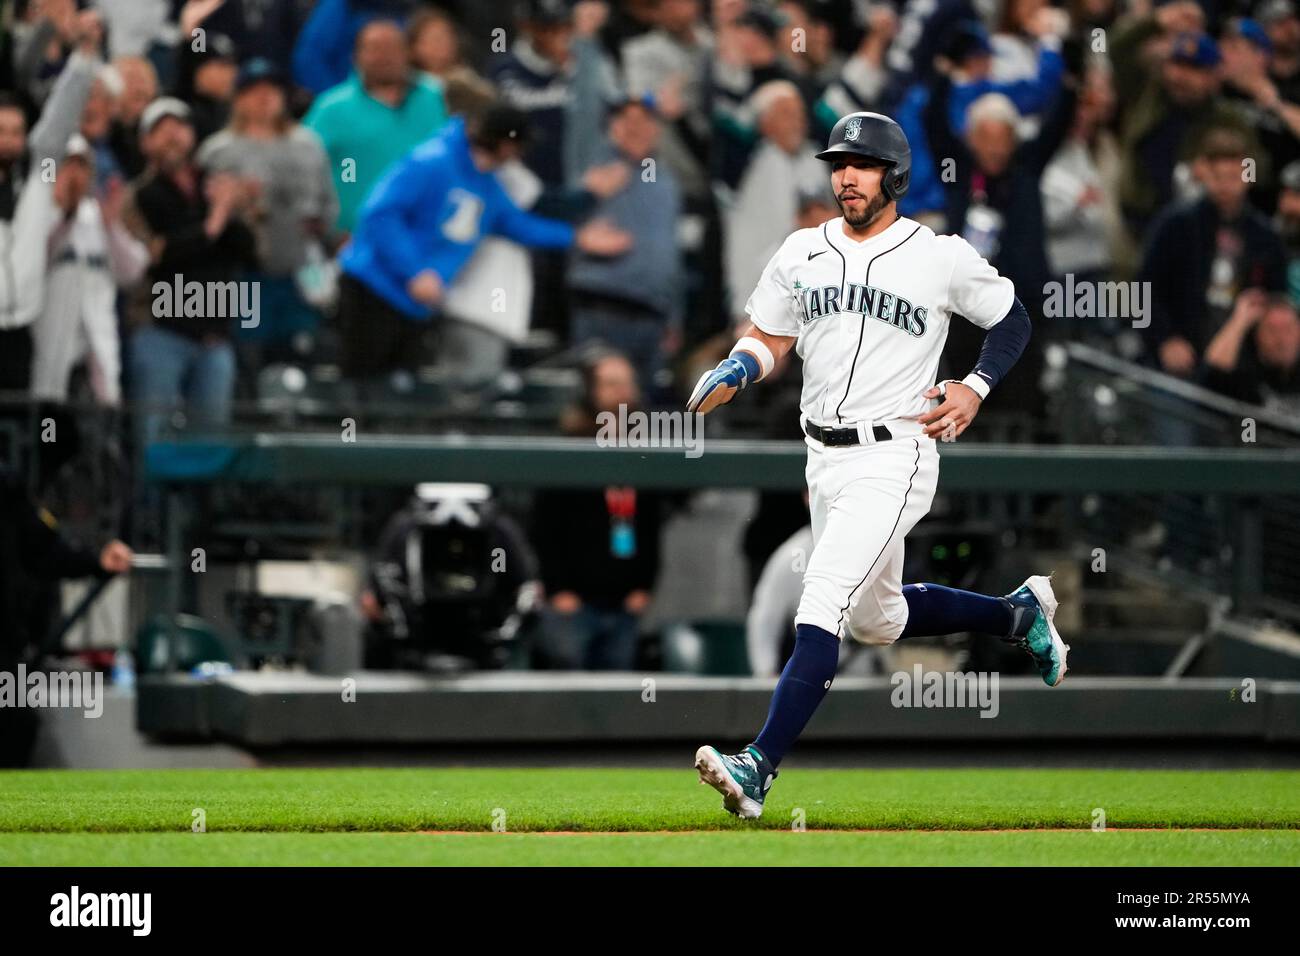 Seattle Mariners' Jose Caballero runs home to score on a walk-off single  from Cal Raleigh to win the game 1-0 against the New York Yankees during  the 10th inning of a baseball